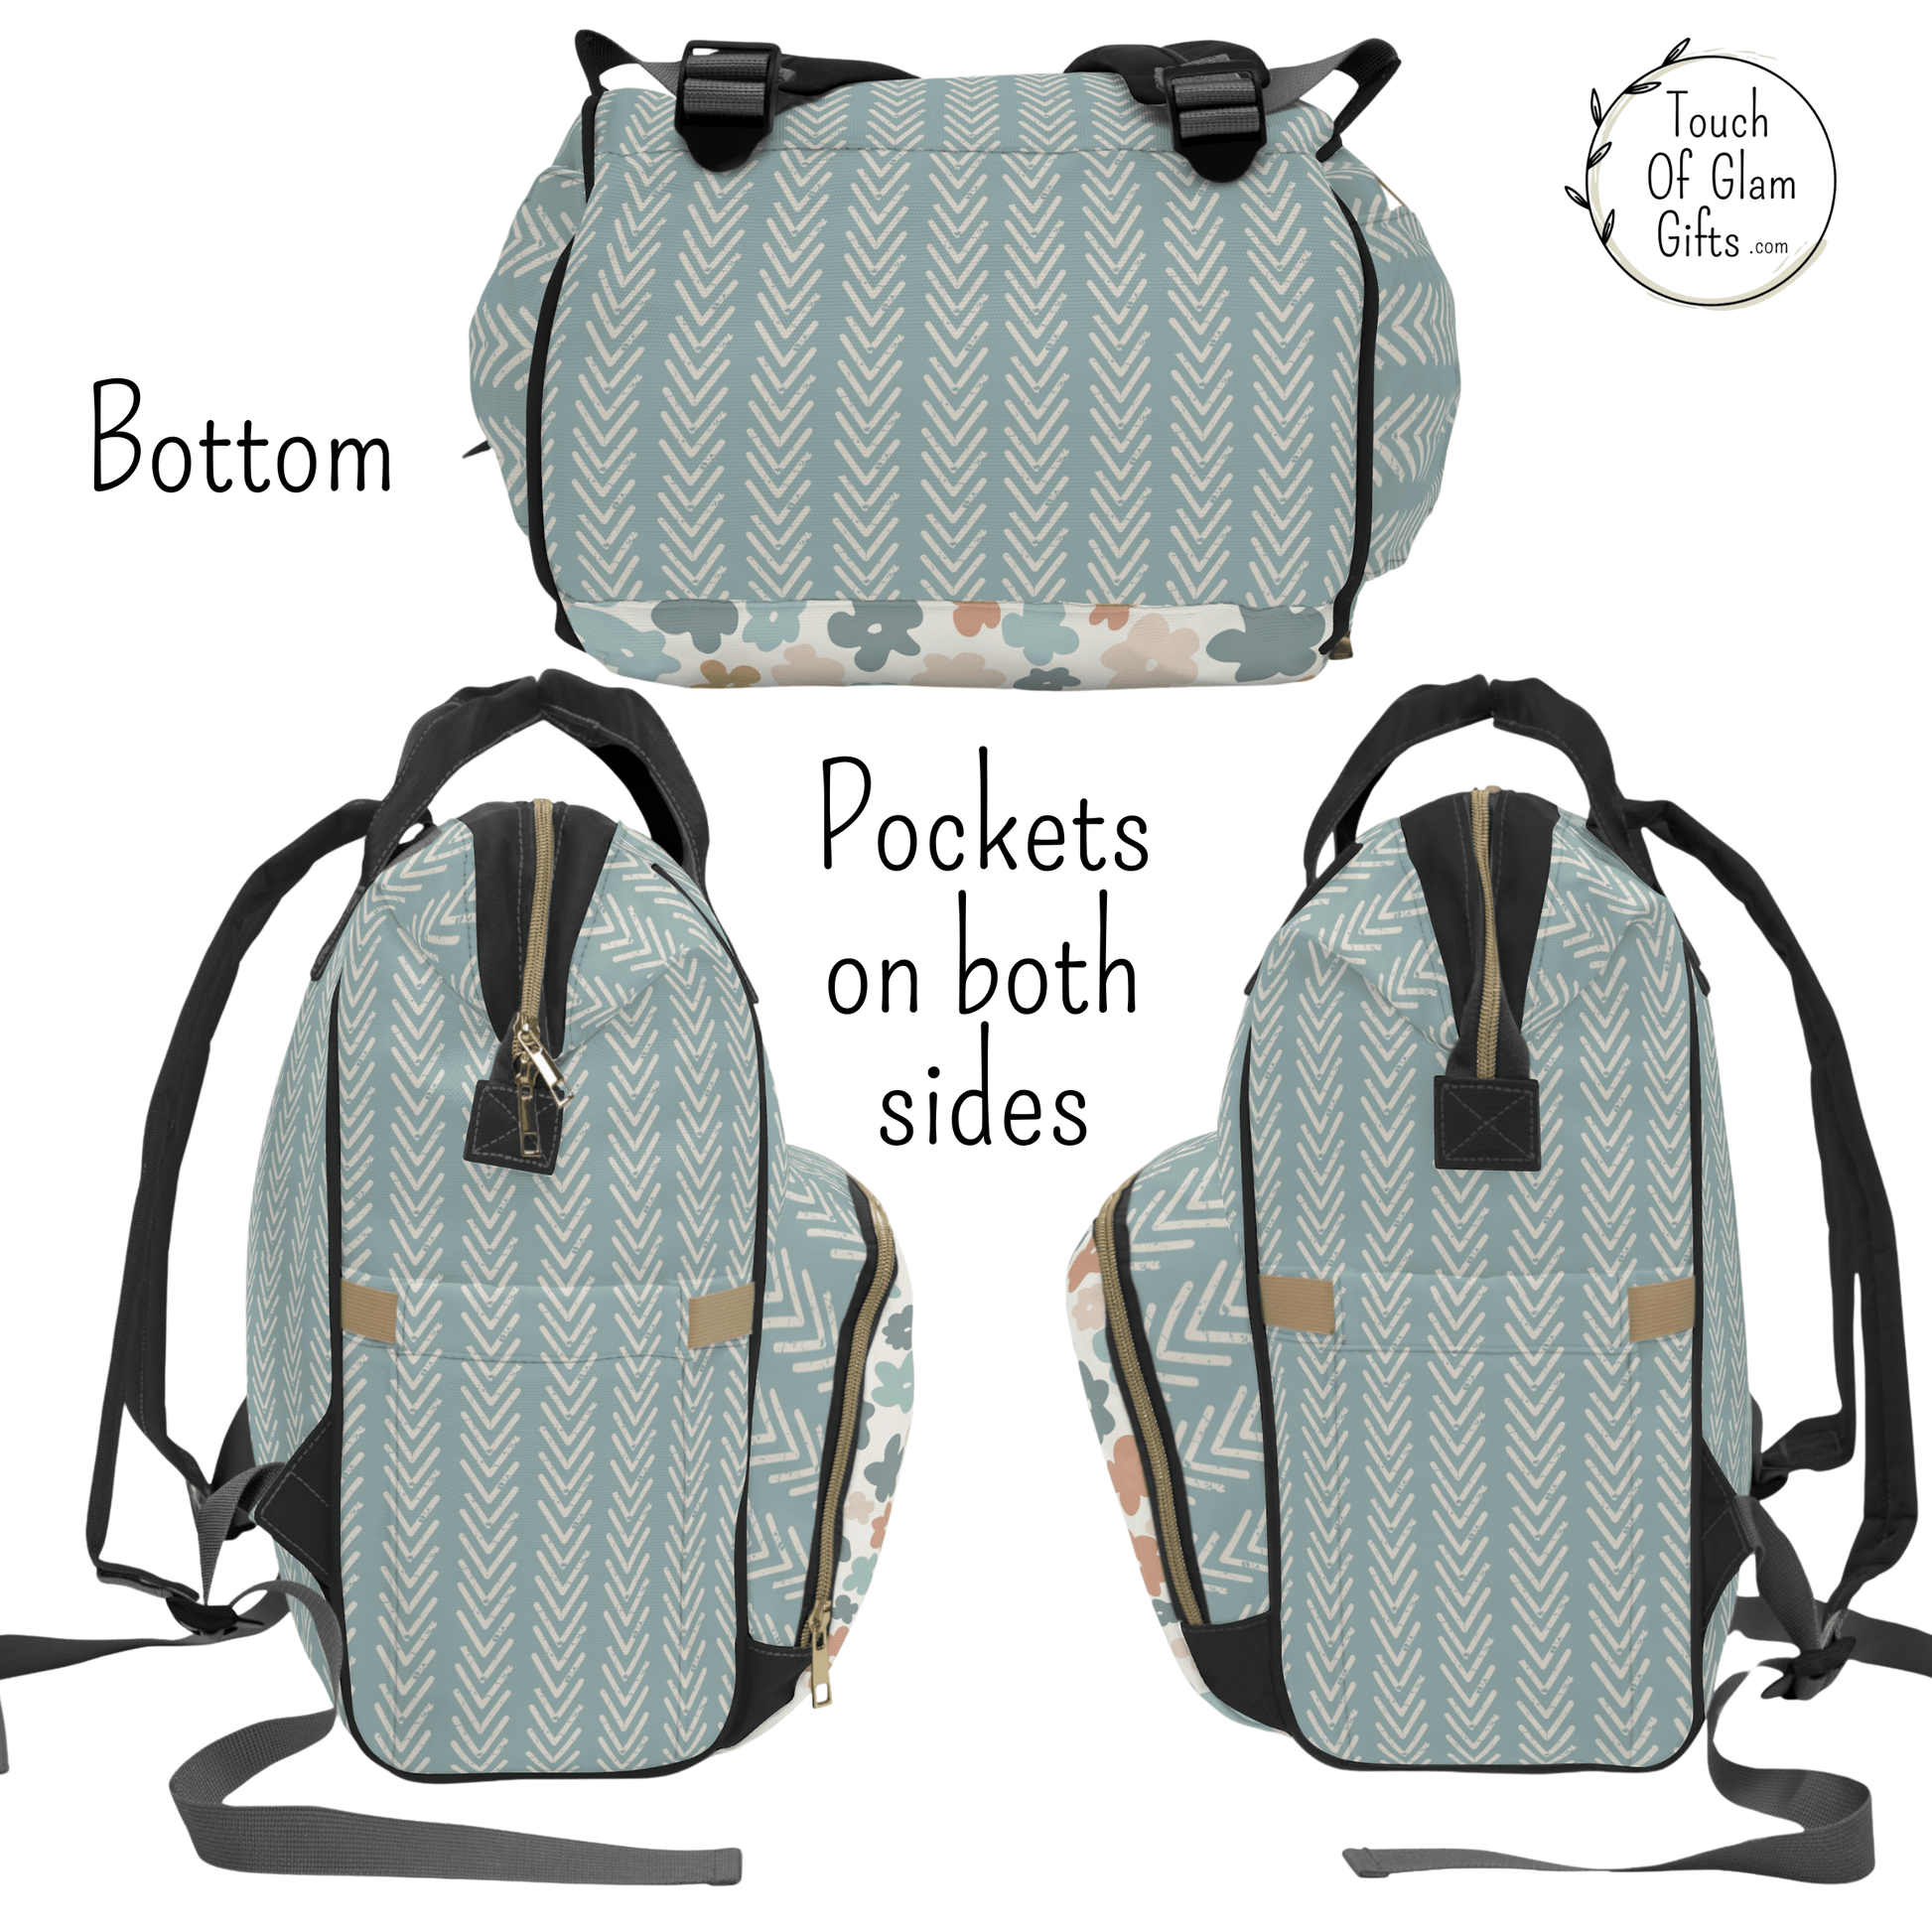 The bottom of our boho diaper bag has the sage green arrow print and both sides of the travel backpack have large pockets for water bottles.